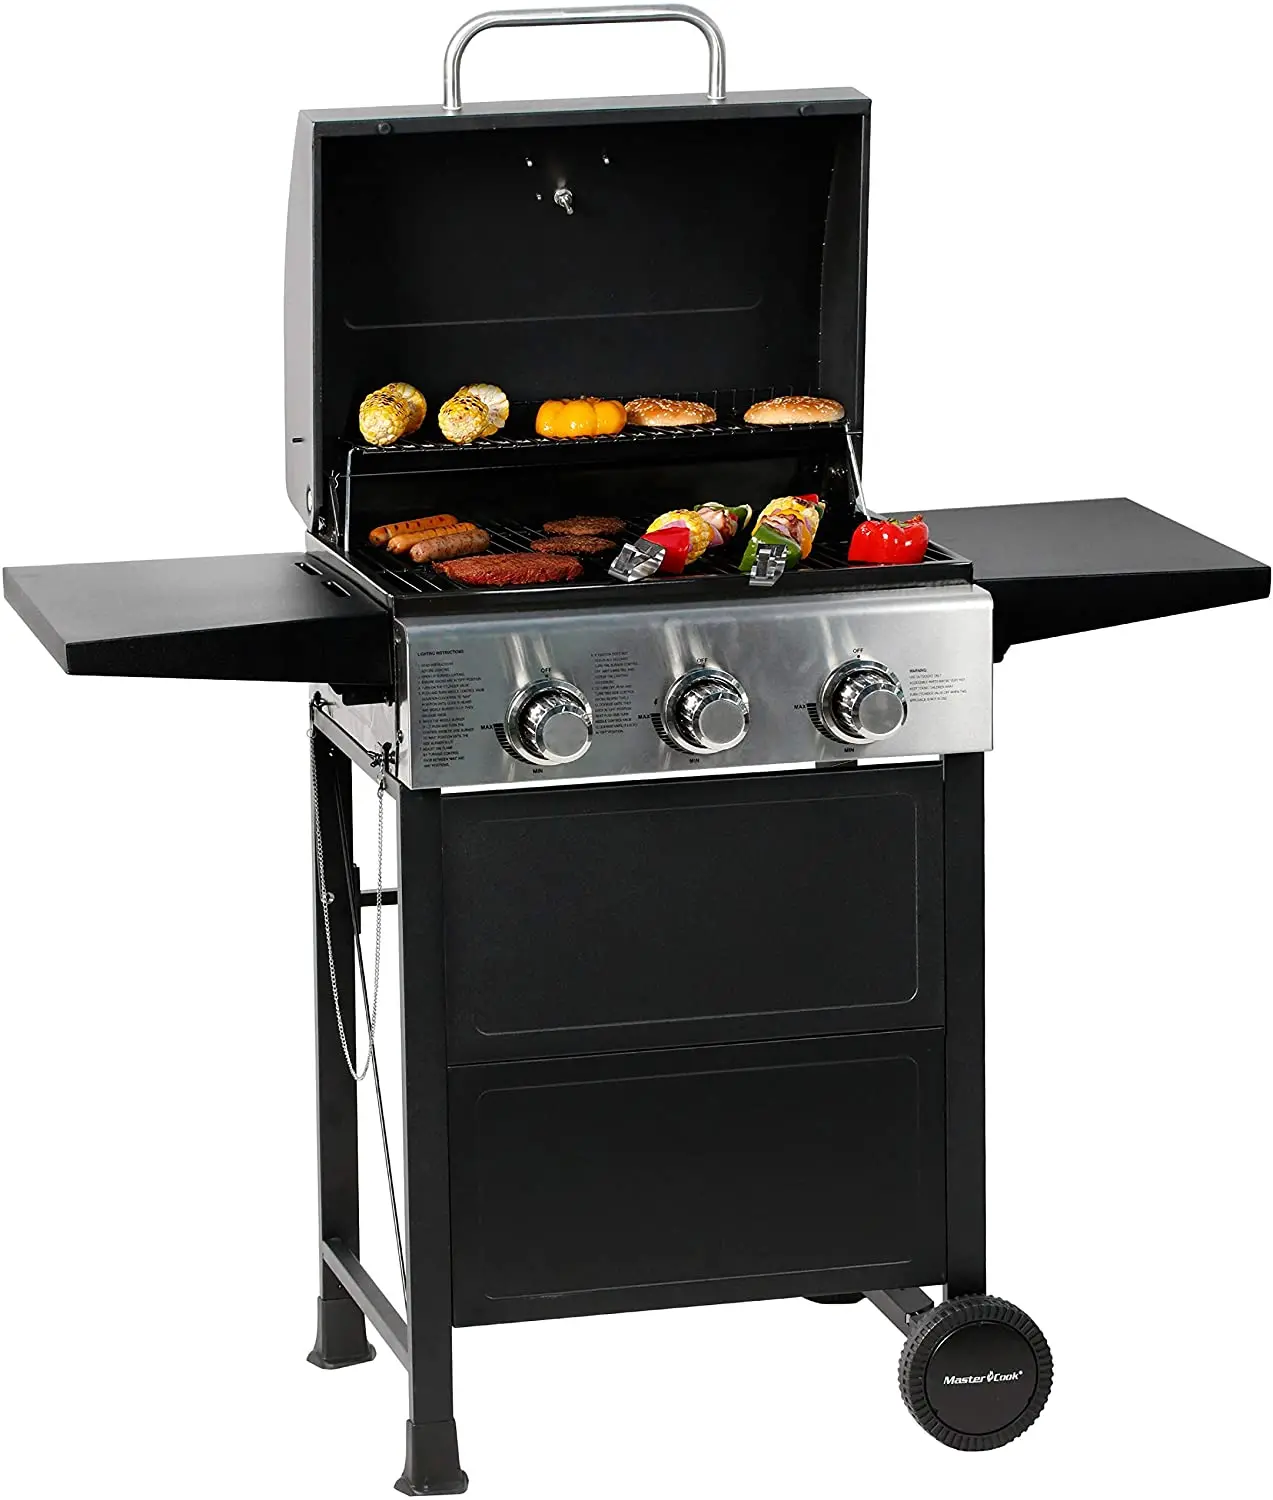 Outdoor bbq gas grill Charcoal Bbq Barbecue Grill Machine